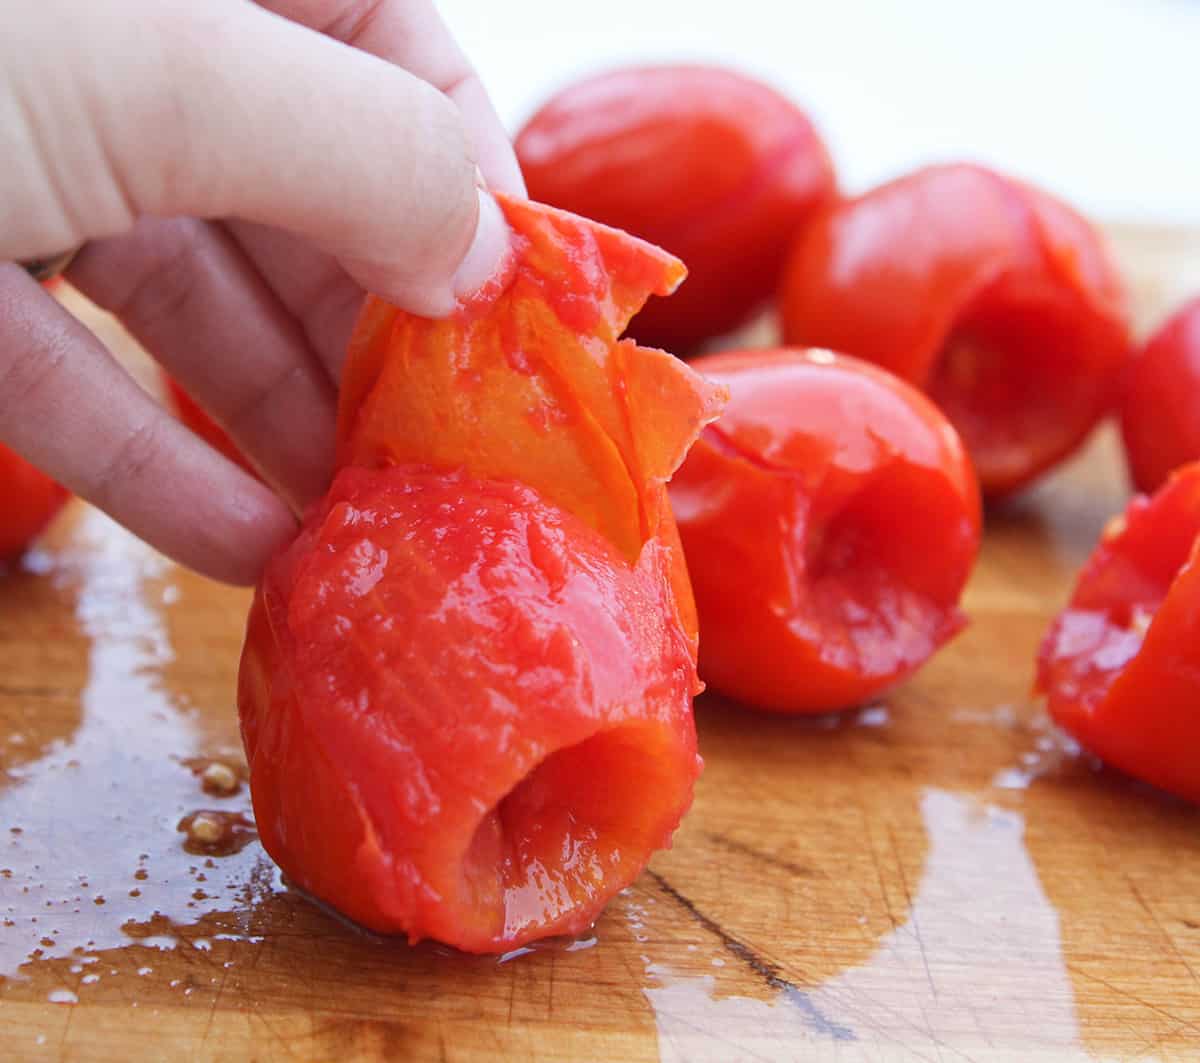 Hand peeling skin off of a tomato.